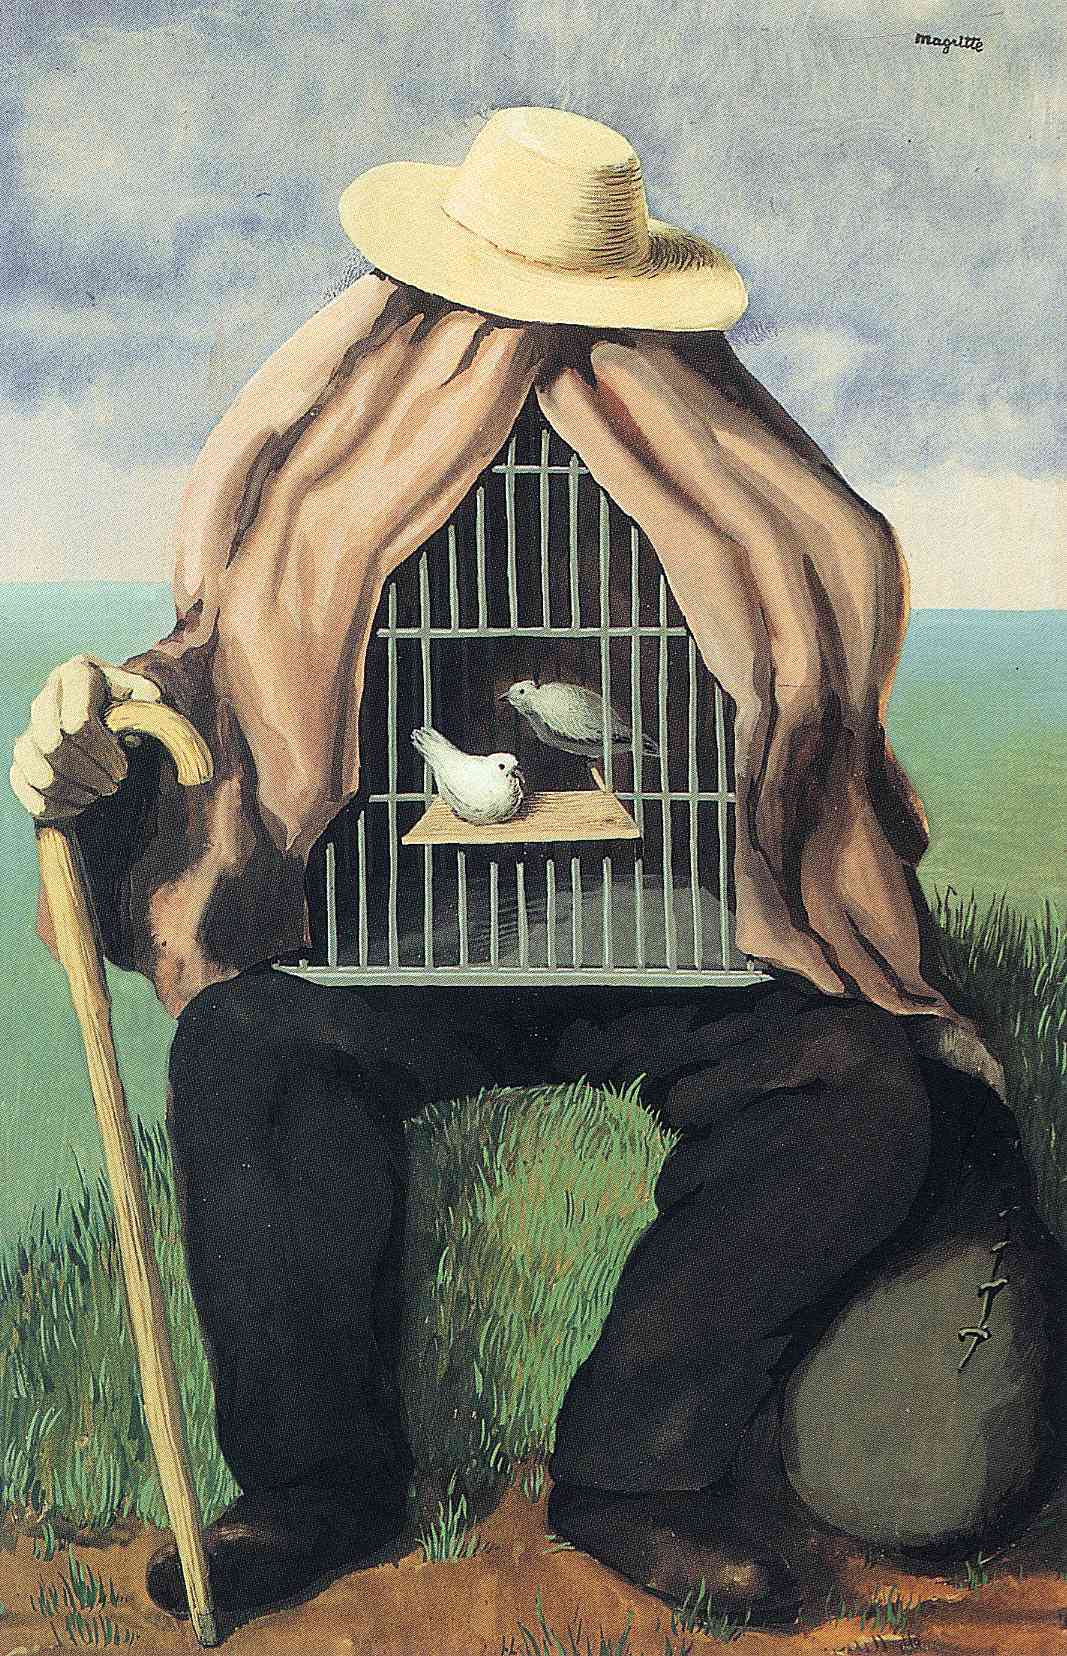 Rene Magritte - The therapeutist.jpg